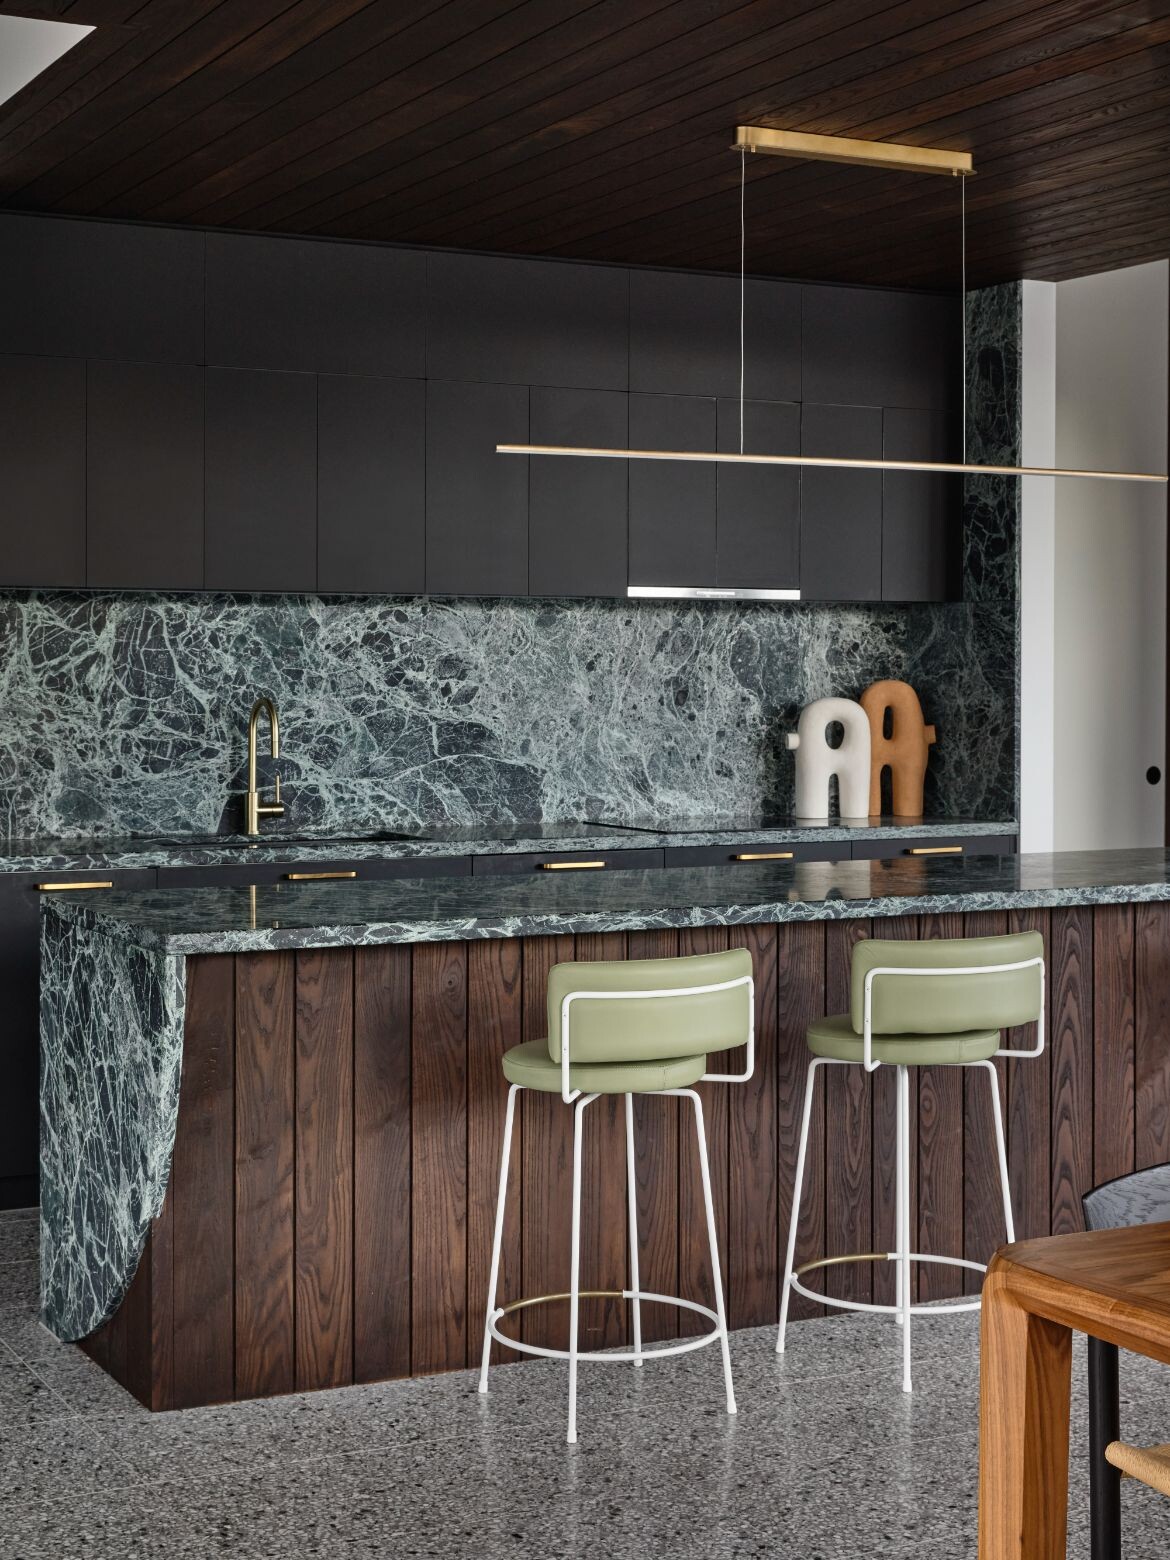 A statement kitchen with an incredible green stone features at Sorrento Beach House